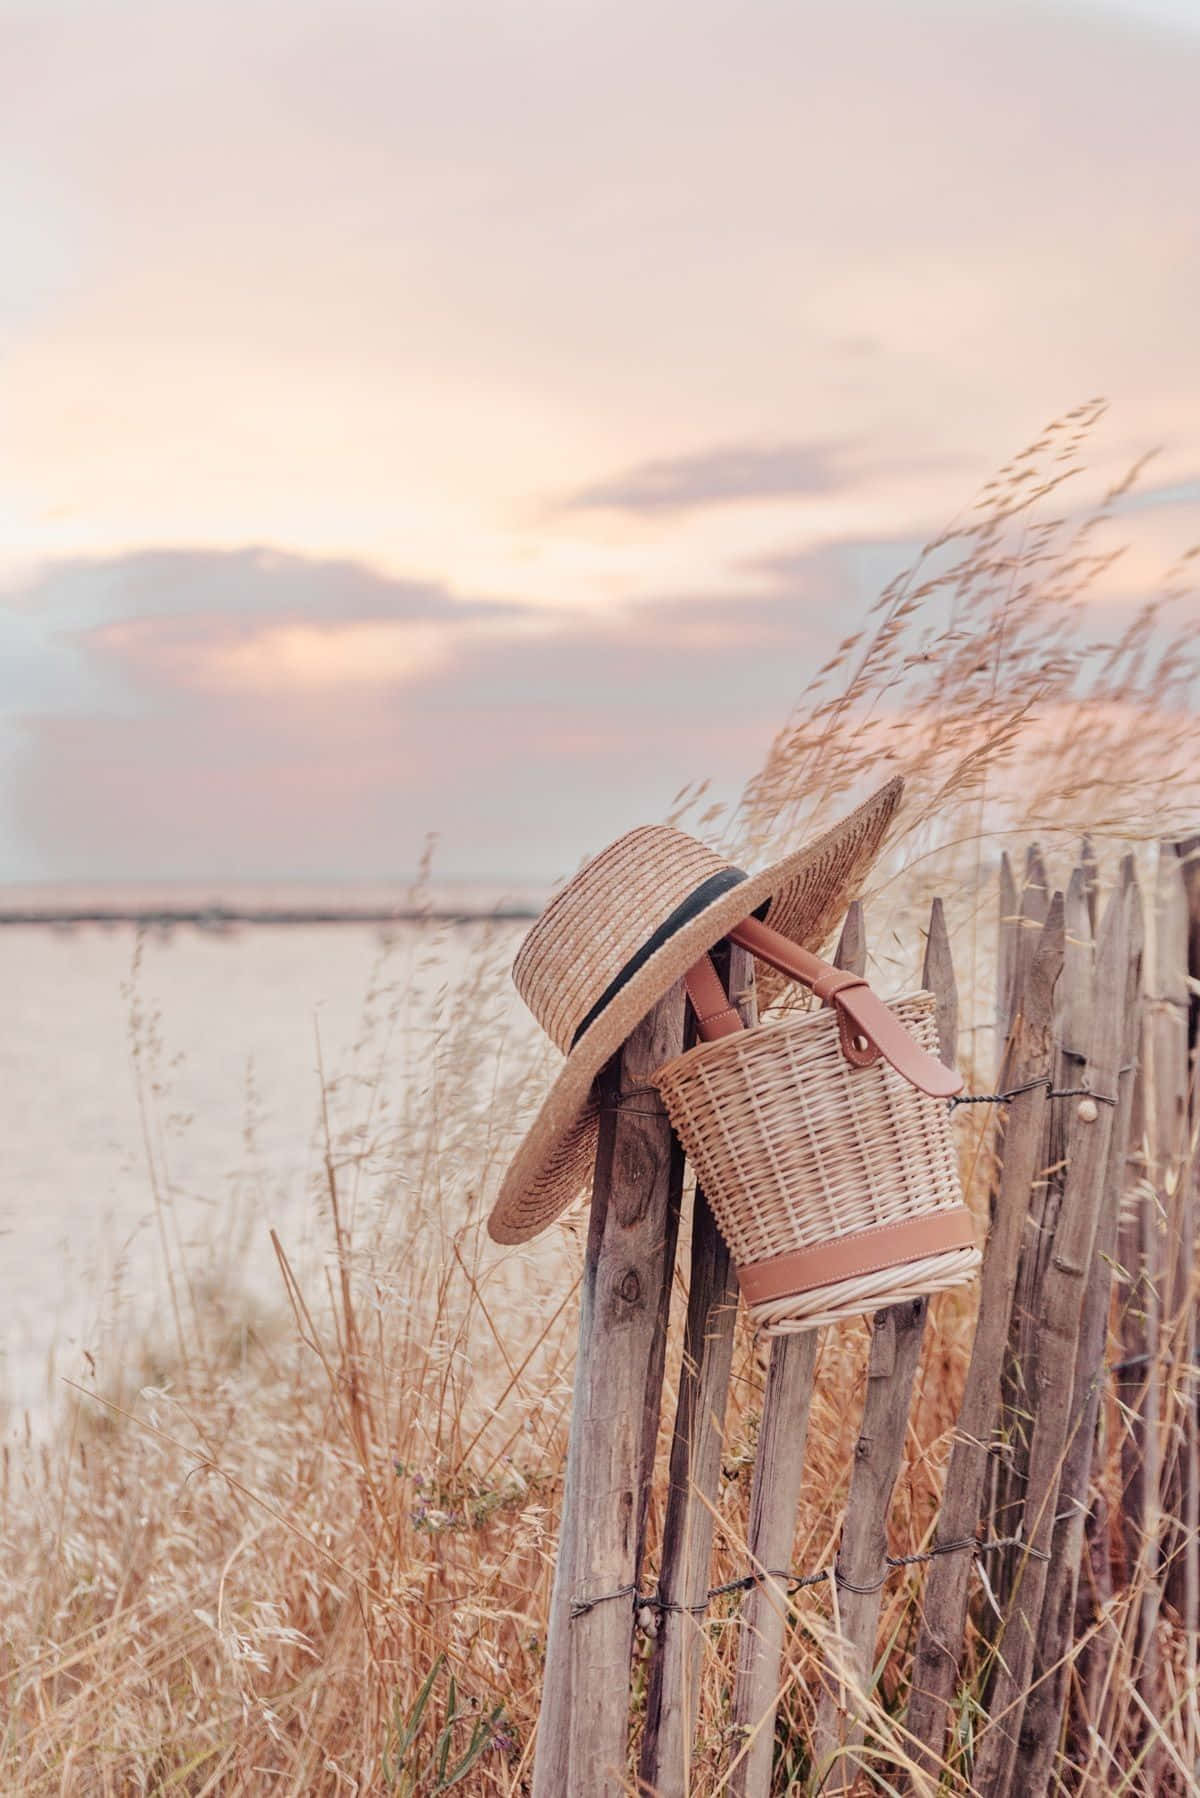 Pastel Summer Sunsetwith Straw Hatand Bag Wallpaper